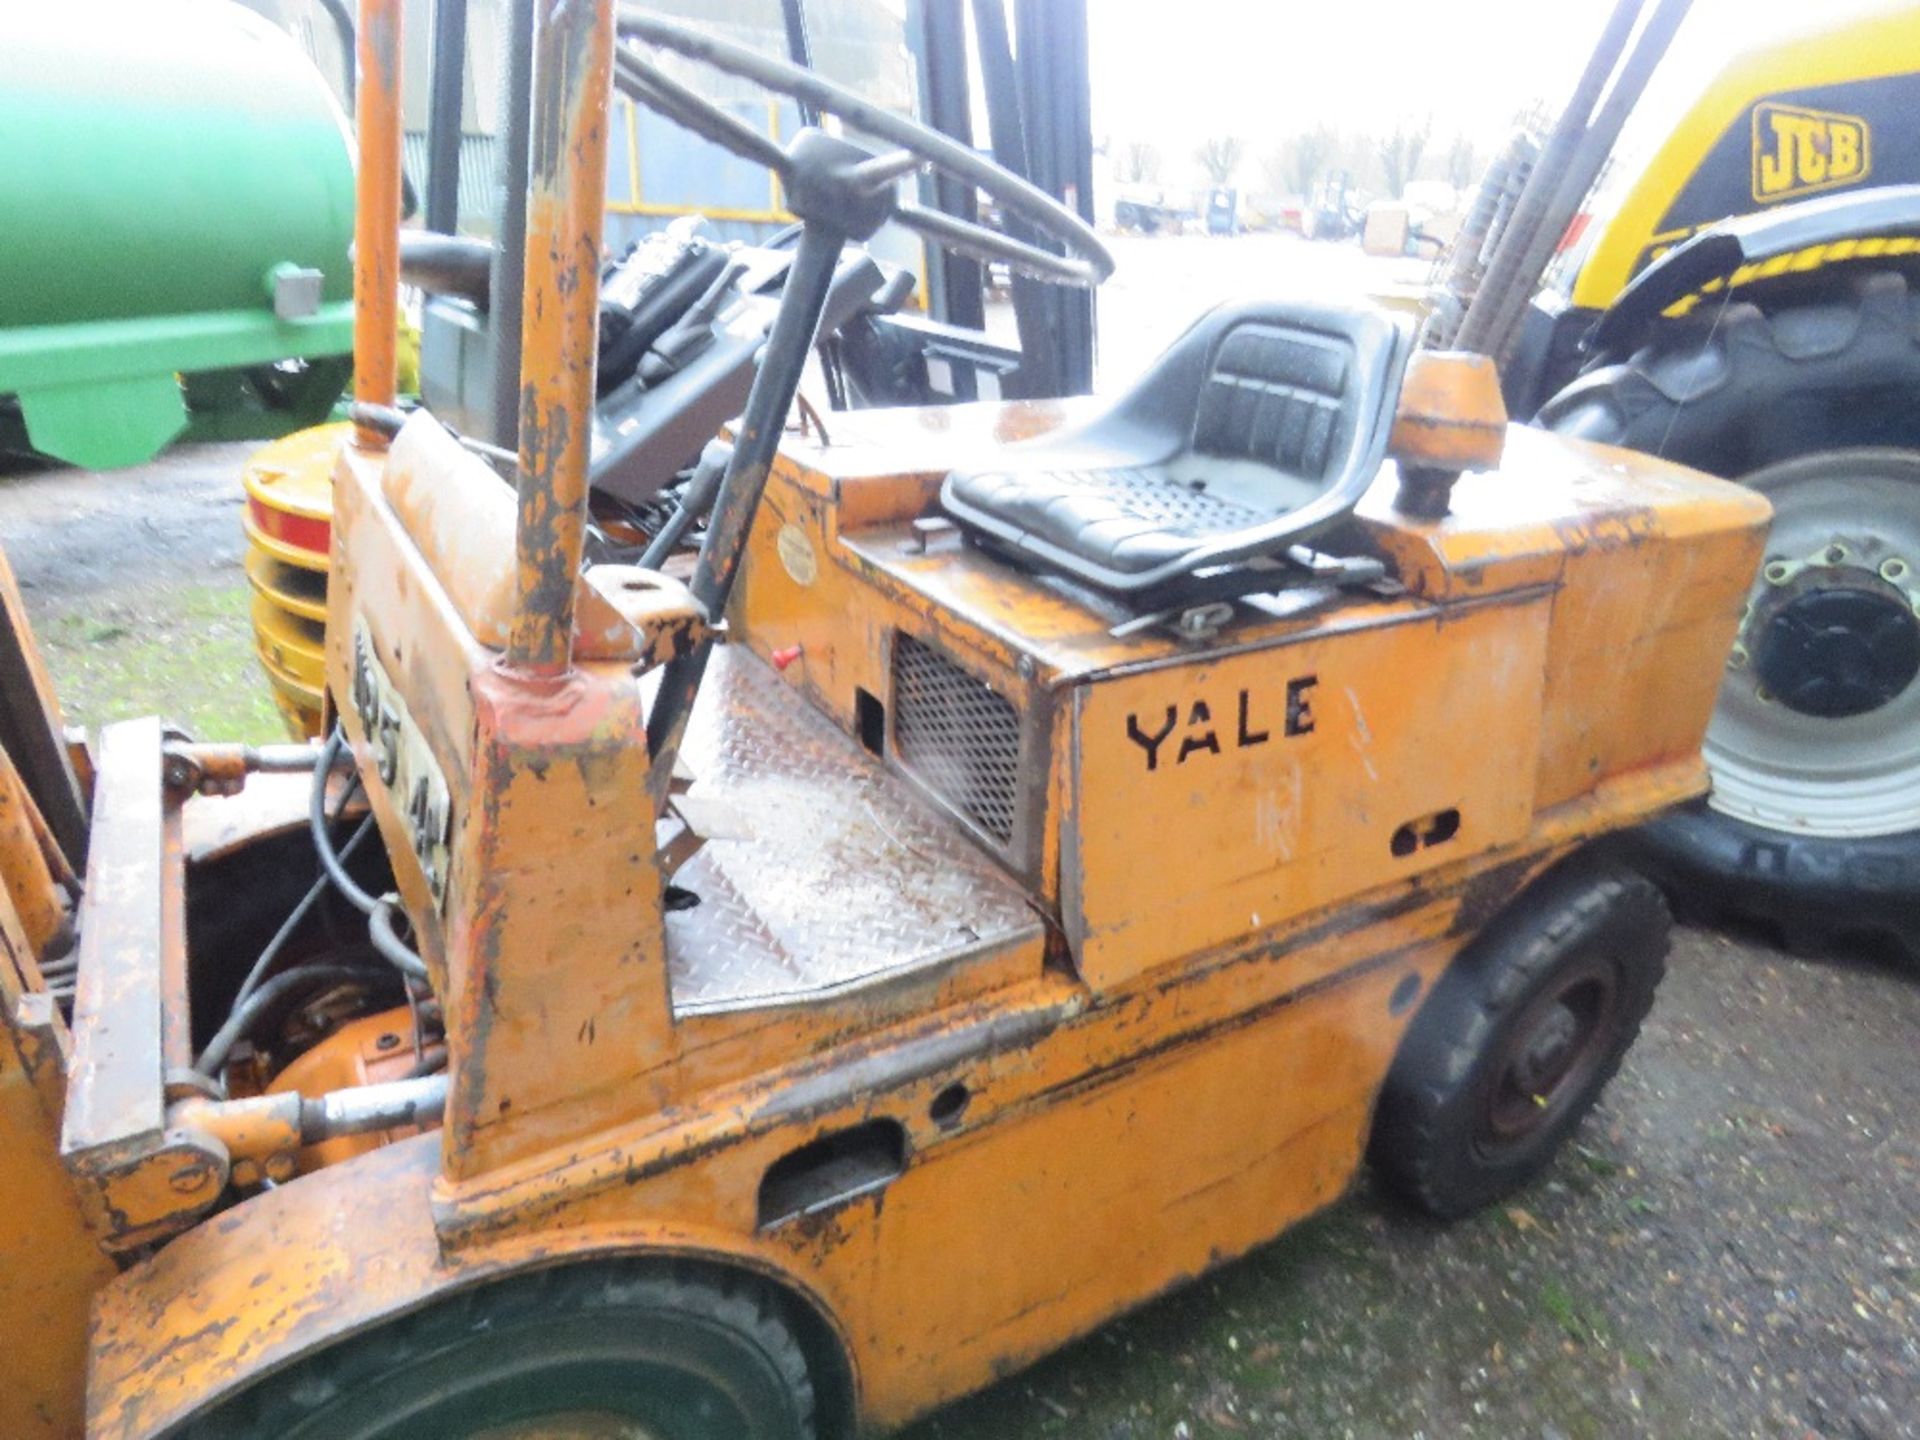 YALE DIESEL FORKLIFT TRUCK. WHEN TESTED WAS SEEN TO DRIVE, BRAKE AND LIFT (STEERING TIGHT). SEE VIDE - Image 3 of 5